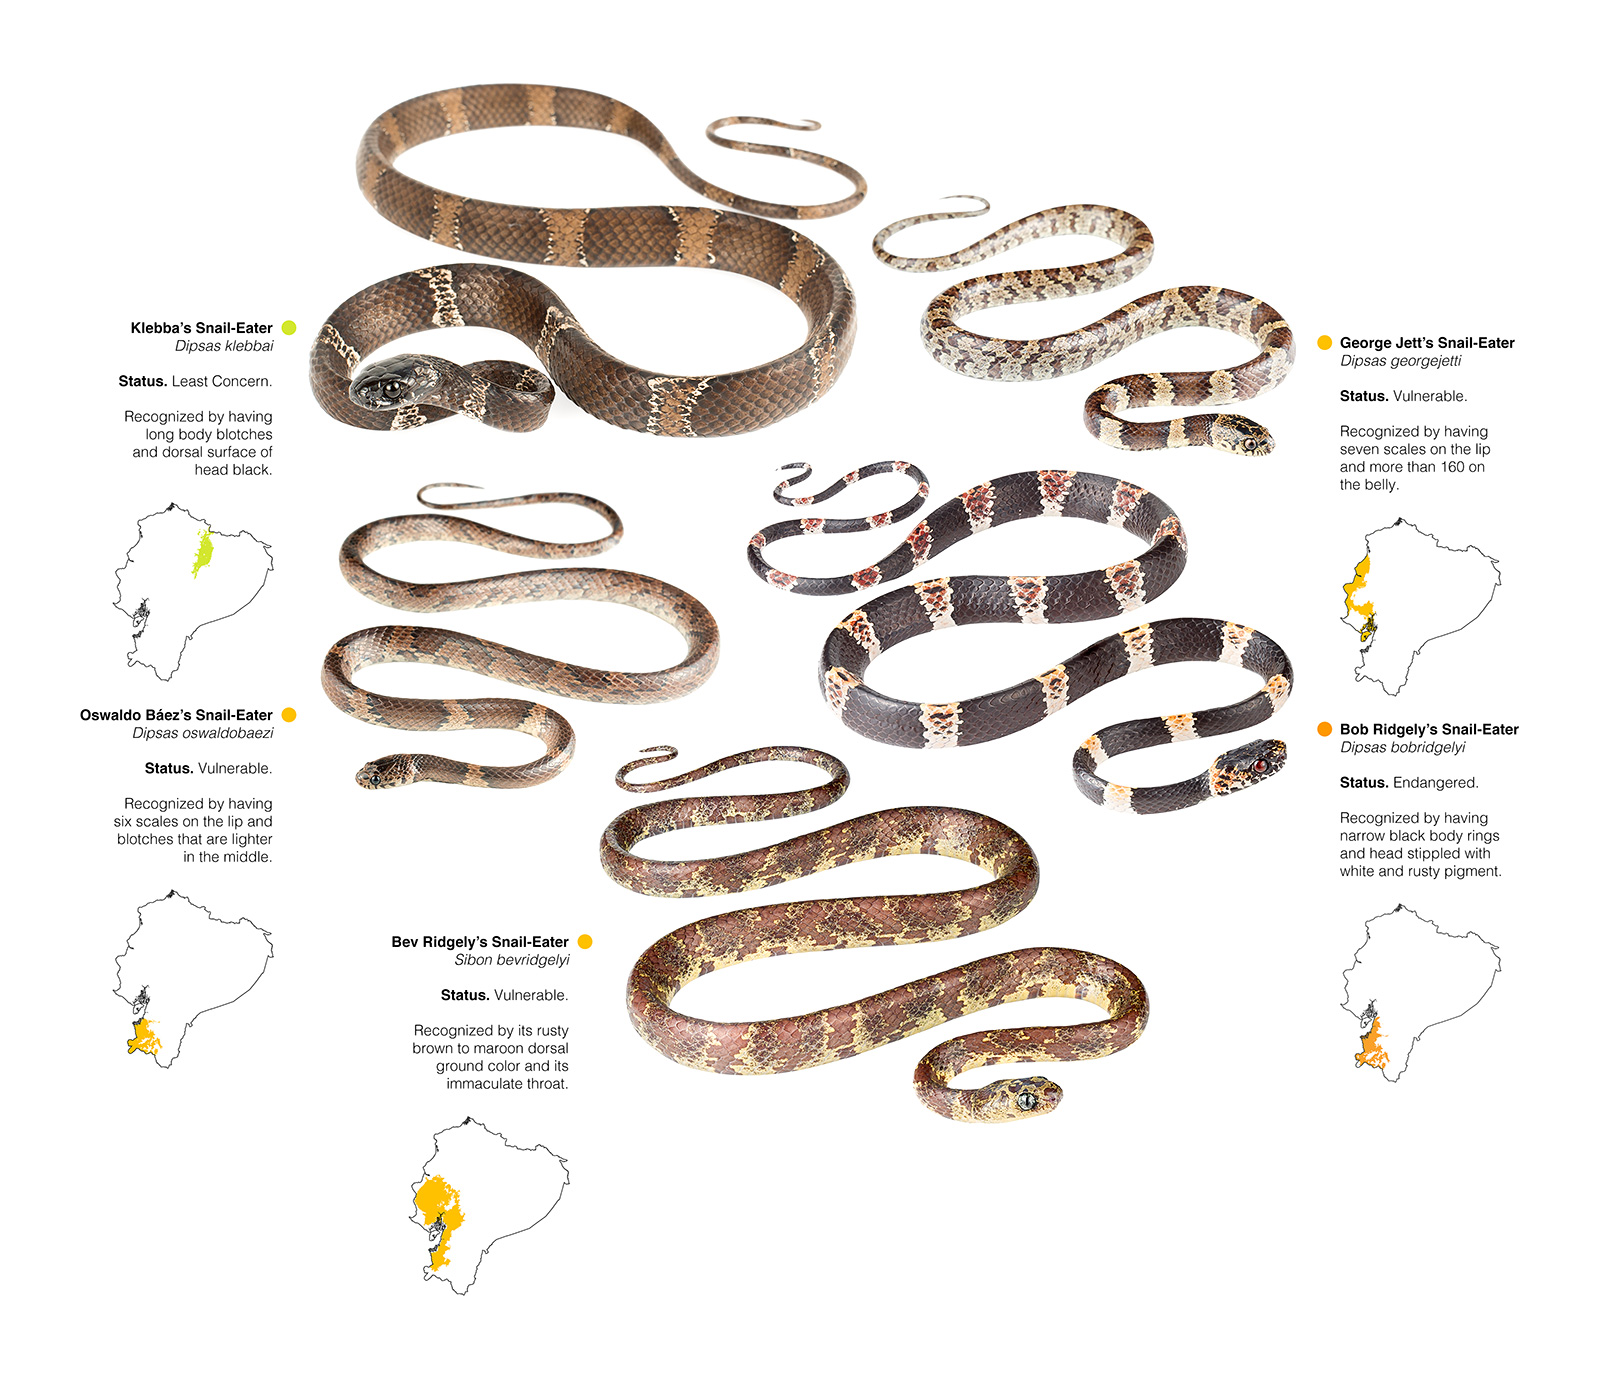 Collage showing the five new species of snakes